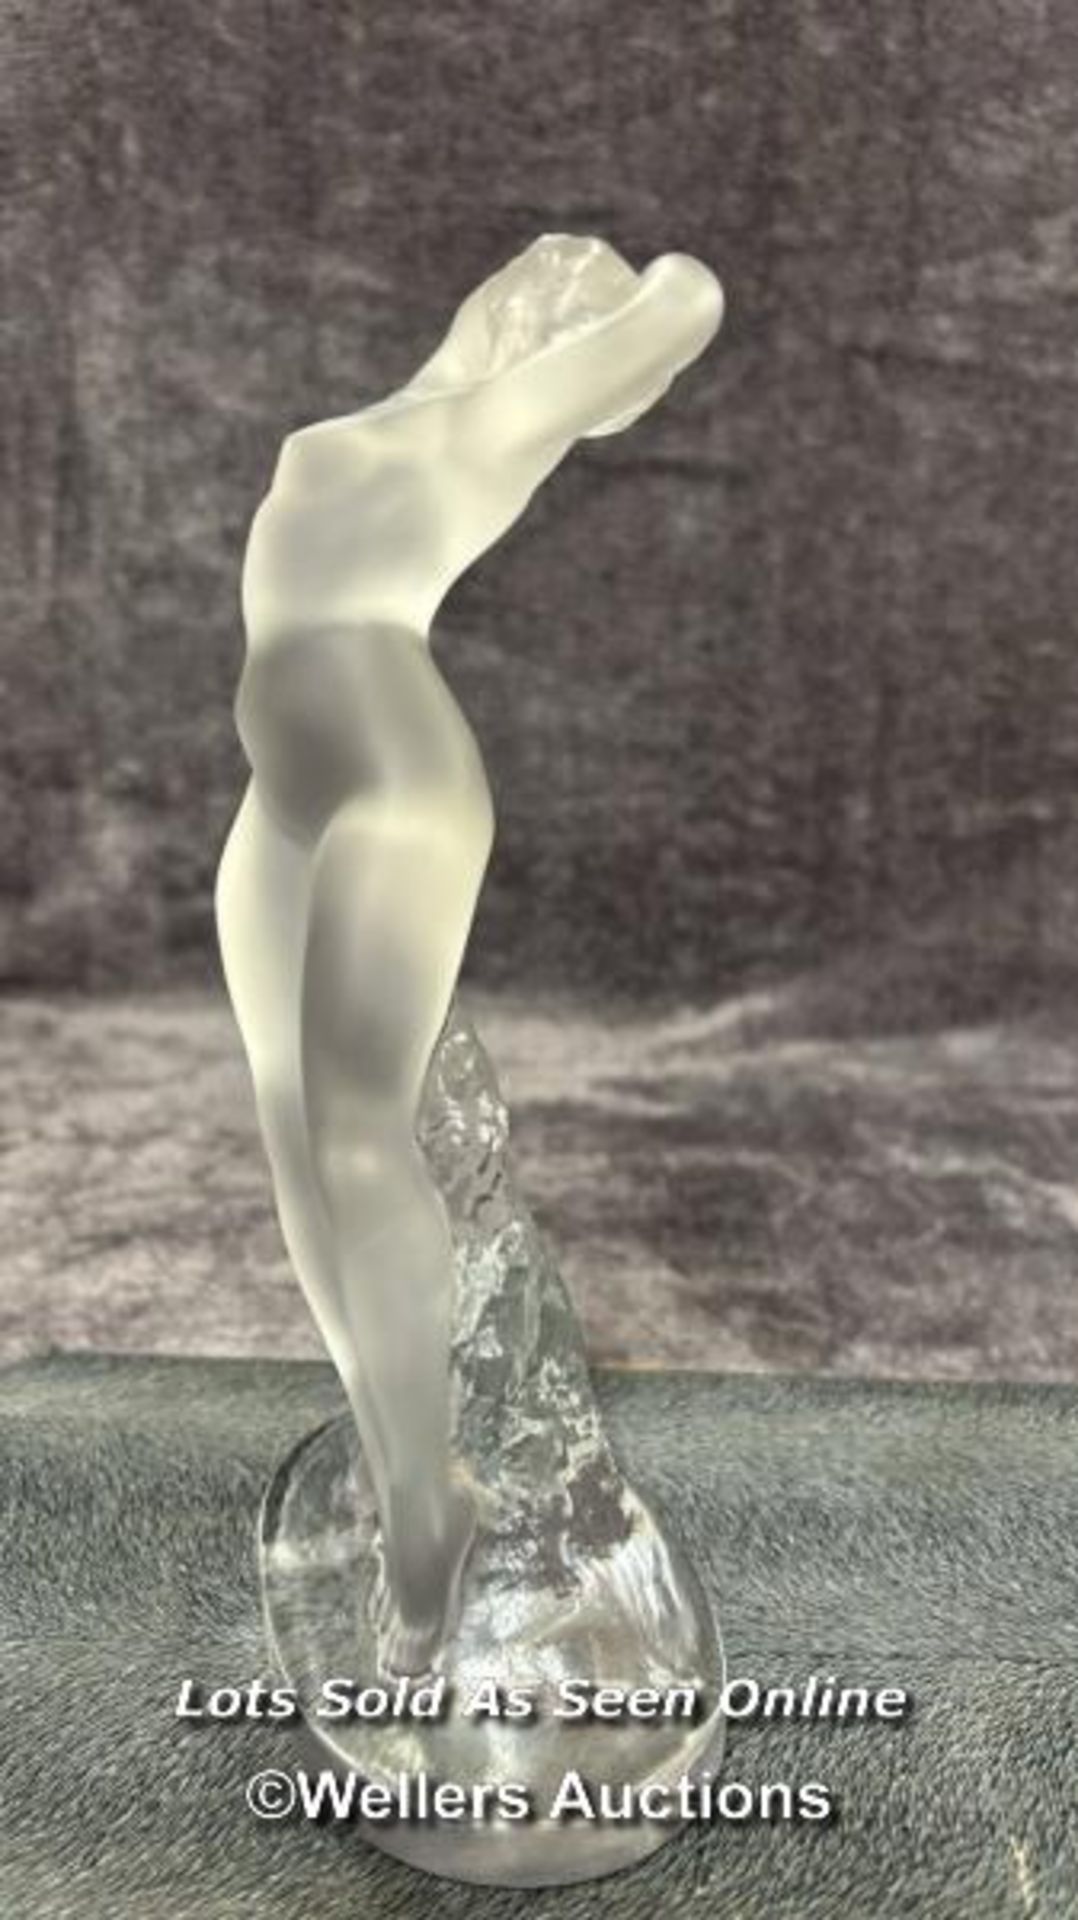 Lalique part frosted crystal figurine 'Danseuse Bras Leves', 23cm high / AN2 - Image 2 of 6